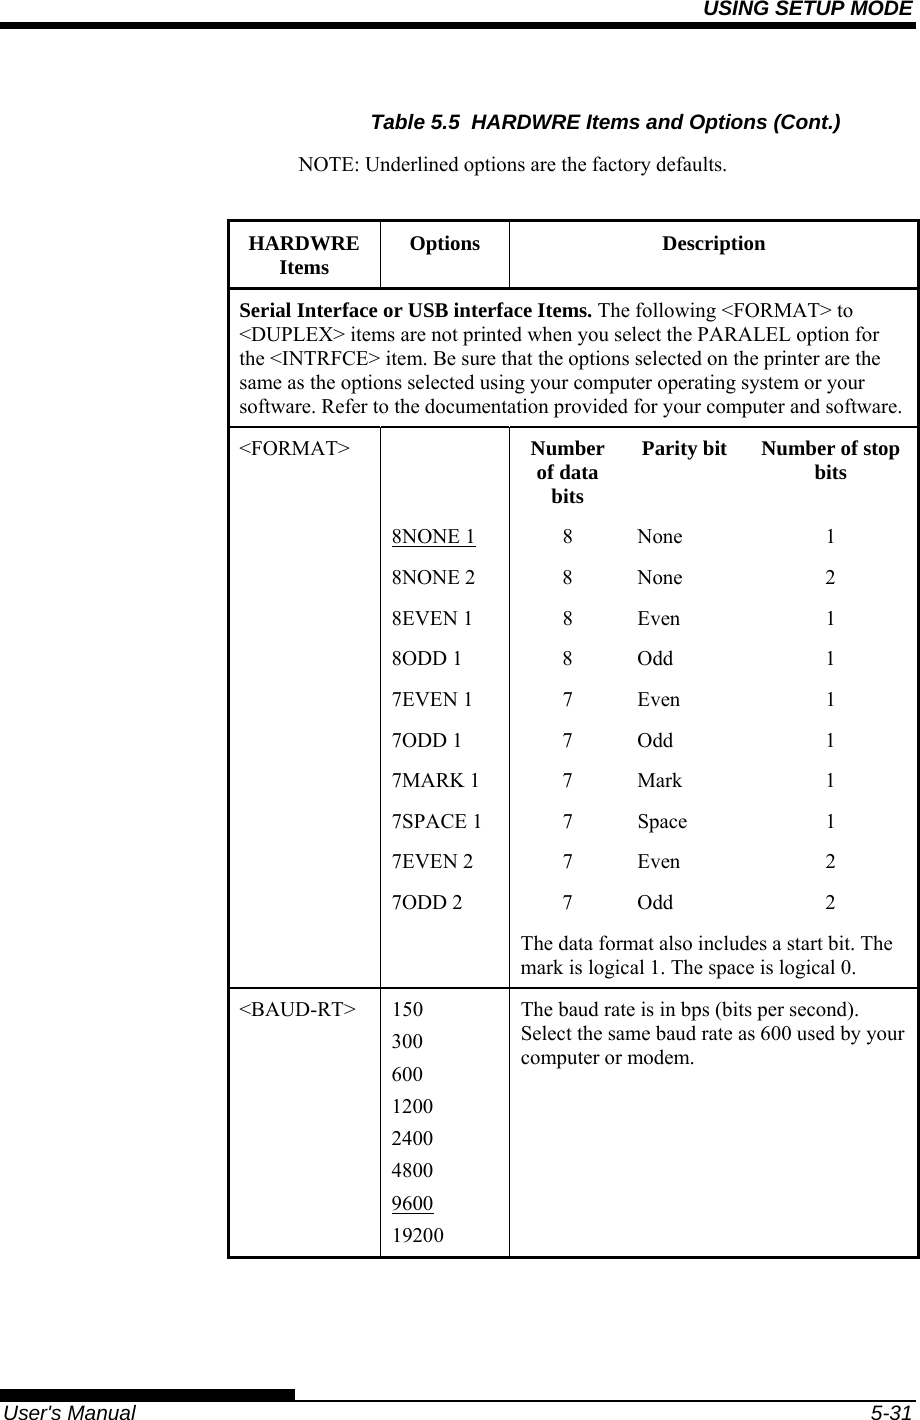 USING SETUP MODE   User&apos;s Manual  5-31 Table 5.5  HARDWRE Items and Options (Cont.) NOTE: Underlined options are the factory defaults.  HARDWRE Items  Options Description Serial Interface or USB interface Items. The following &lt;FORMAT&gt; to &lt;DUPLEX&gt; items are not printed when you select the PARALEL option for the &lt;INTRFCE&gt; item. Be sure that the options selected on the printer are the same as the options selected using your computer operating system or your software. Refer to the documentation provided for your computer and software.&lt;FORMAT&gt;   Number of data bits Parity bit  Number of stop bits  8NONE 1 8 None  1  8NONE 2 8 None 2  8EVEN 1 8 Even 1  8ODD 1 8 Odd 1  7EVEN 1 7 Even 1  7ODD 1 7 Odd 1  7MARK 1 7 Mark 1  7SPACE 1 7 Space 1  7EVEN 2 7 Even 2  7ODD 2 7 Odd 2   The data format also includes a start bit. The mark is logical 1. The space is logical 0. &lt;BAUD-RT&gt; 150 300 600 1200 2400 4800 9600 19200 The baud rate is in bps (bits per second). Select the same baud rate as 600 used by your computer or modem.  